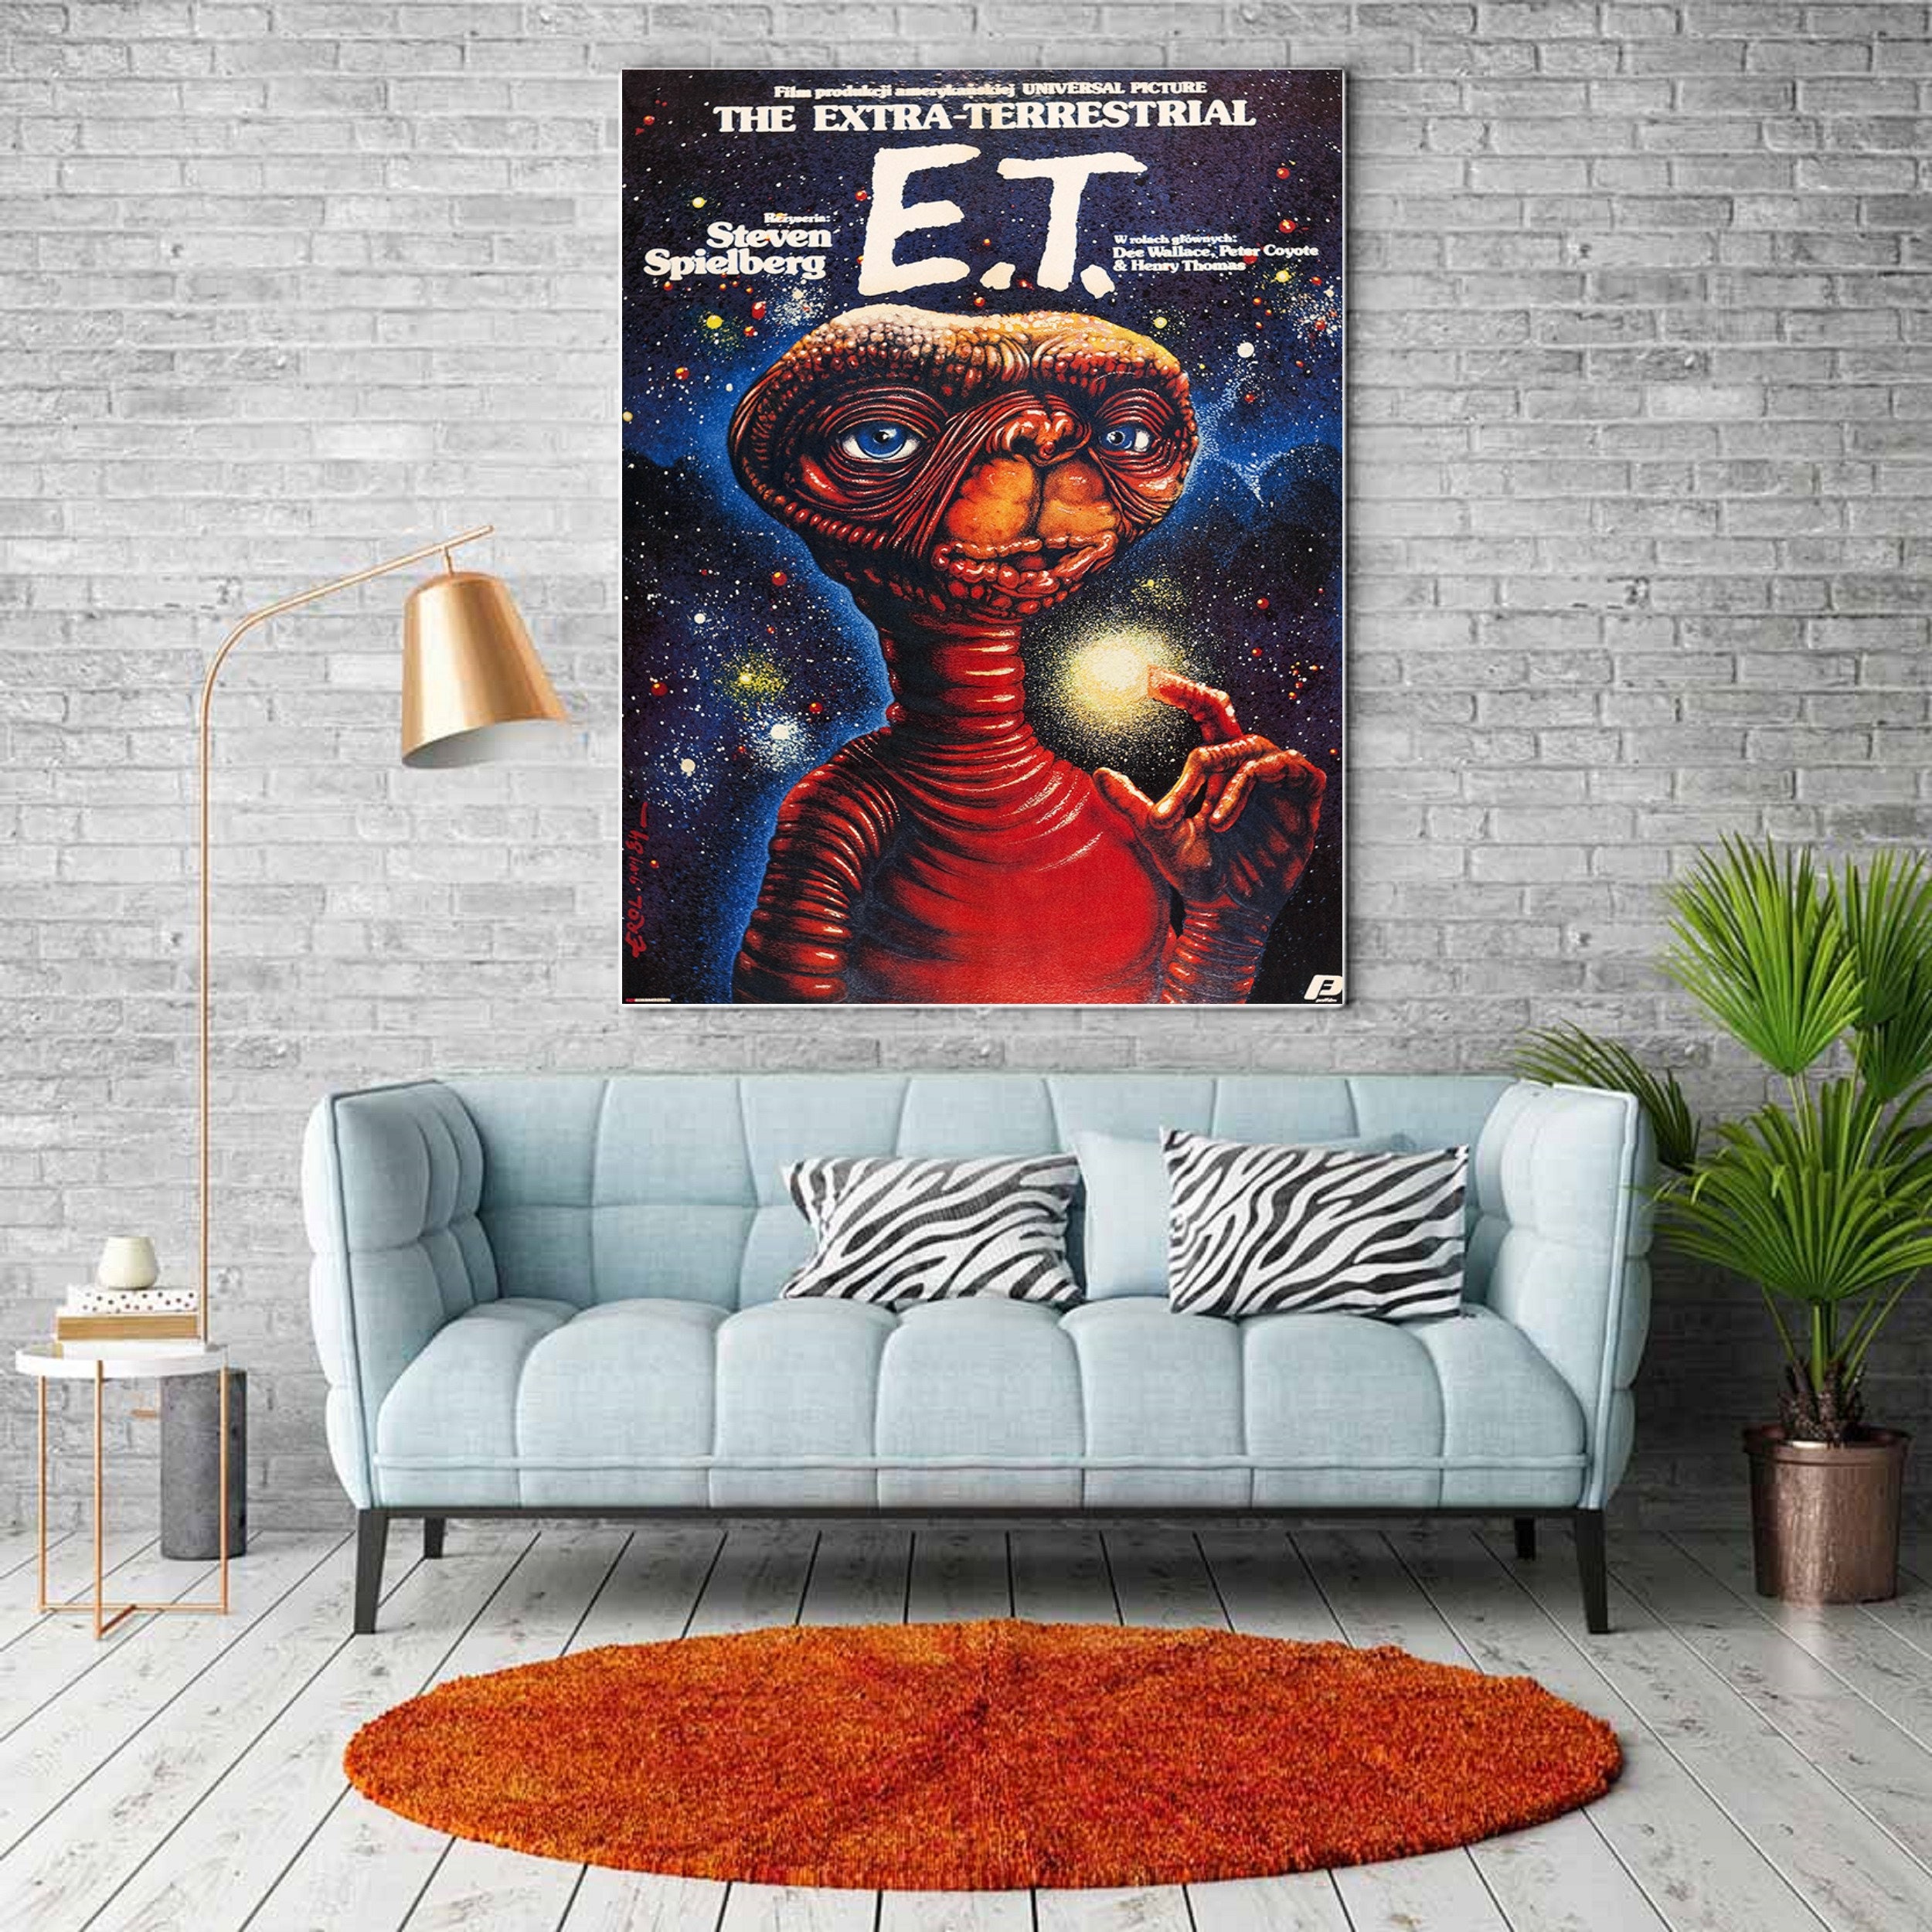 E.T. the Extra Terrestrial Movie Poster